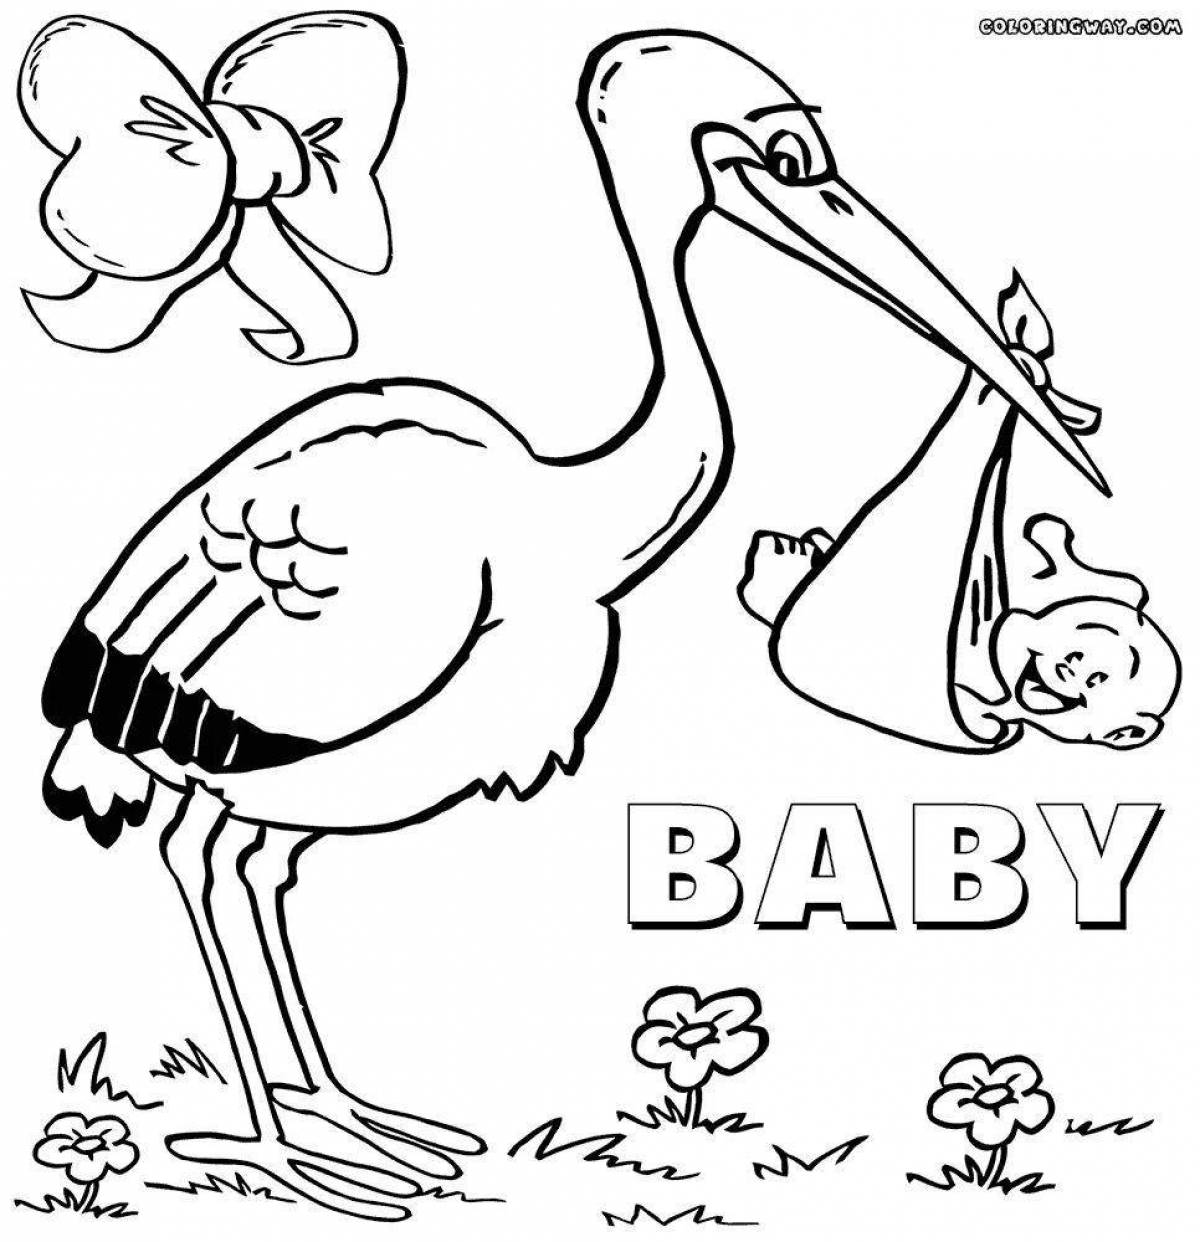 Brilliant stork with baby coloring book